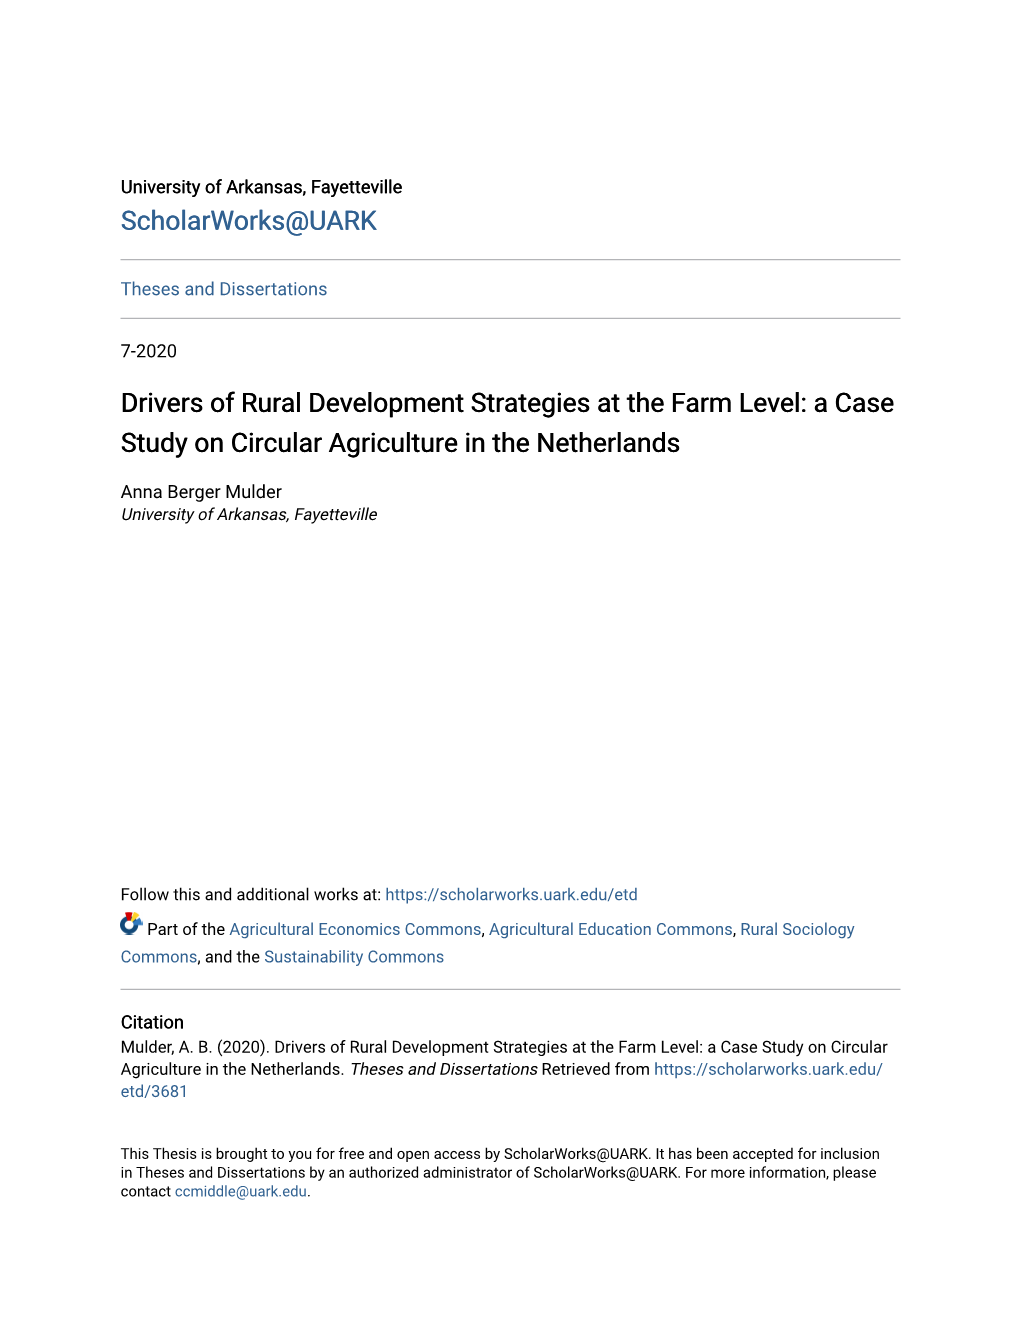 Drivers of Rural Development Strategies at the Farm Level: a Case Study on Circular Agriculture in the Netherlands